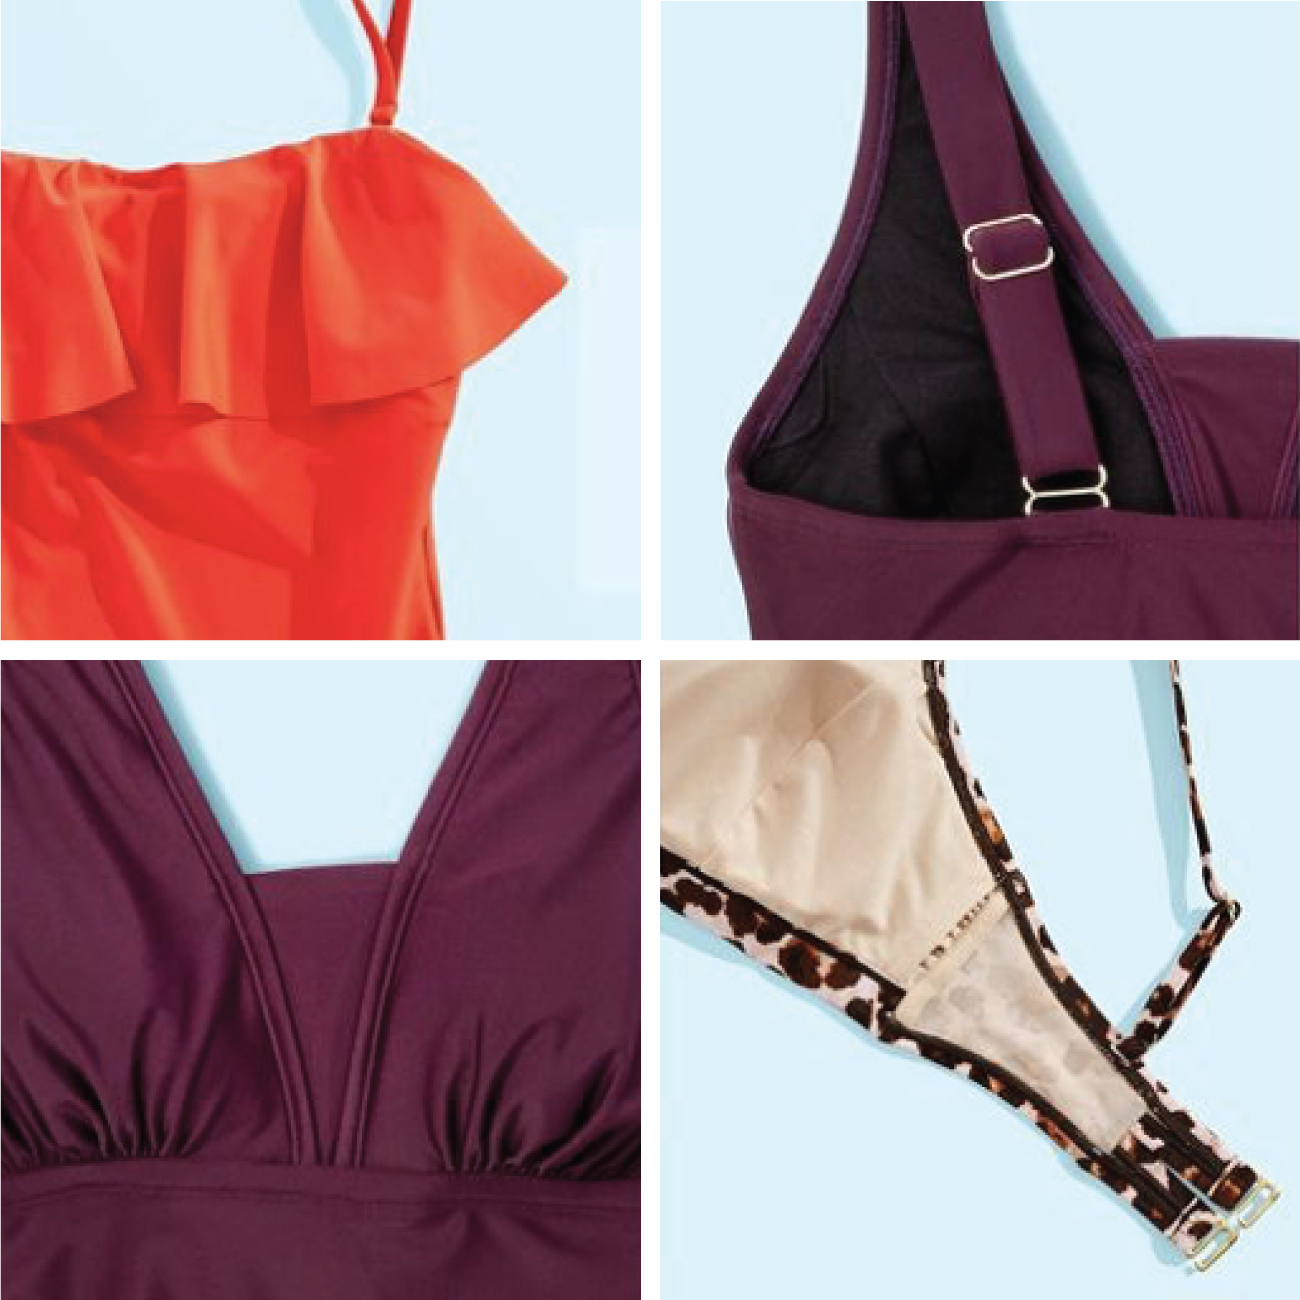 A collage of four images show up-close details of swimsuits